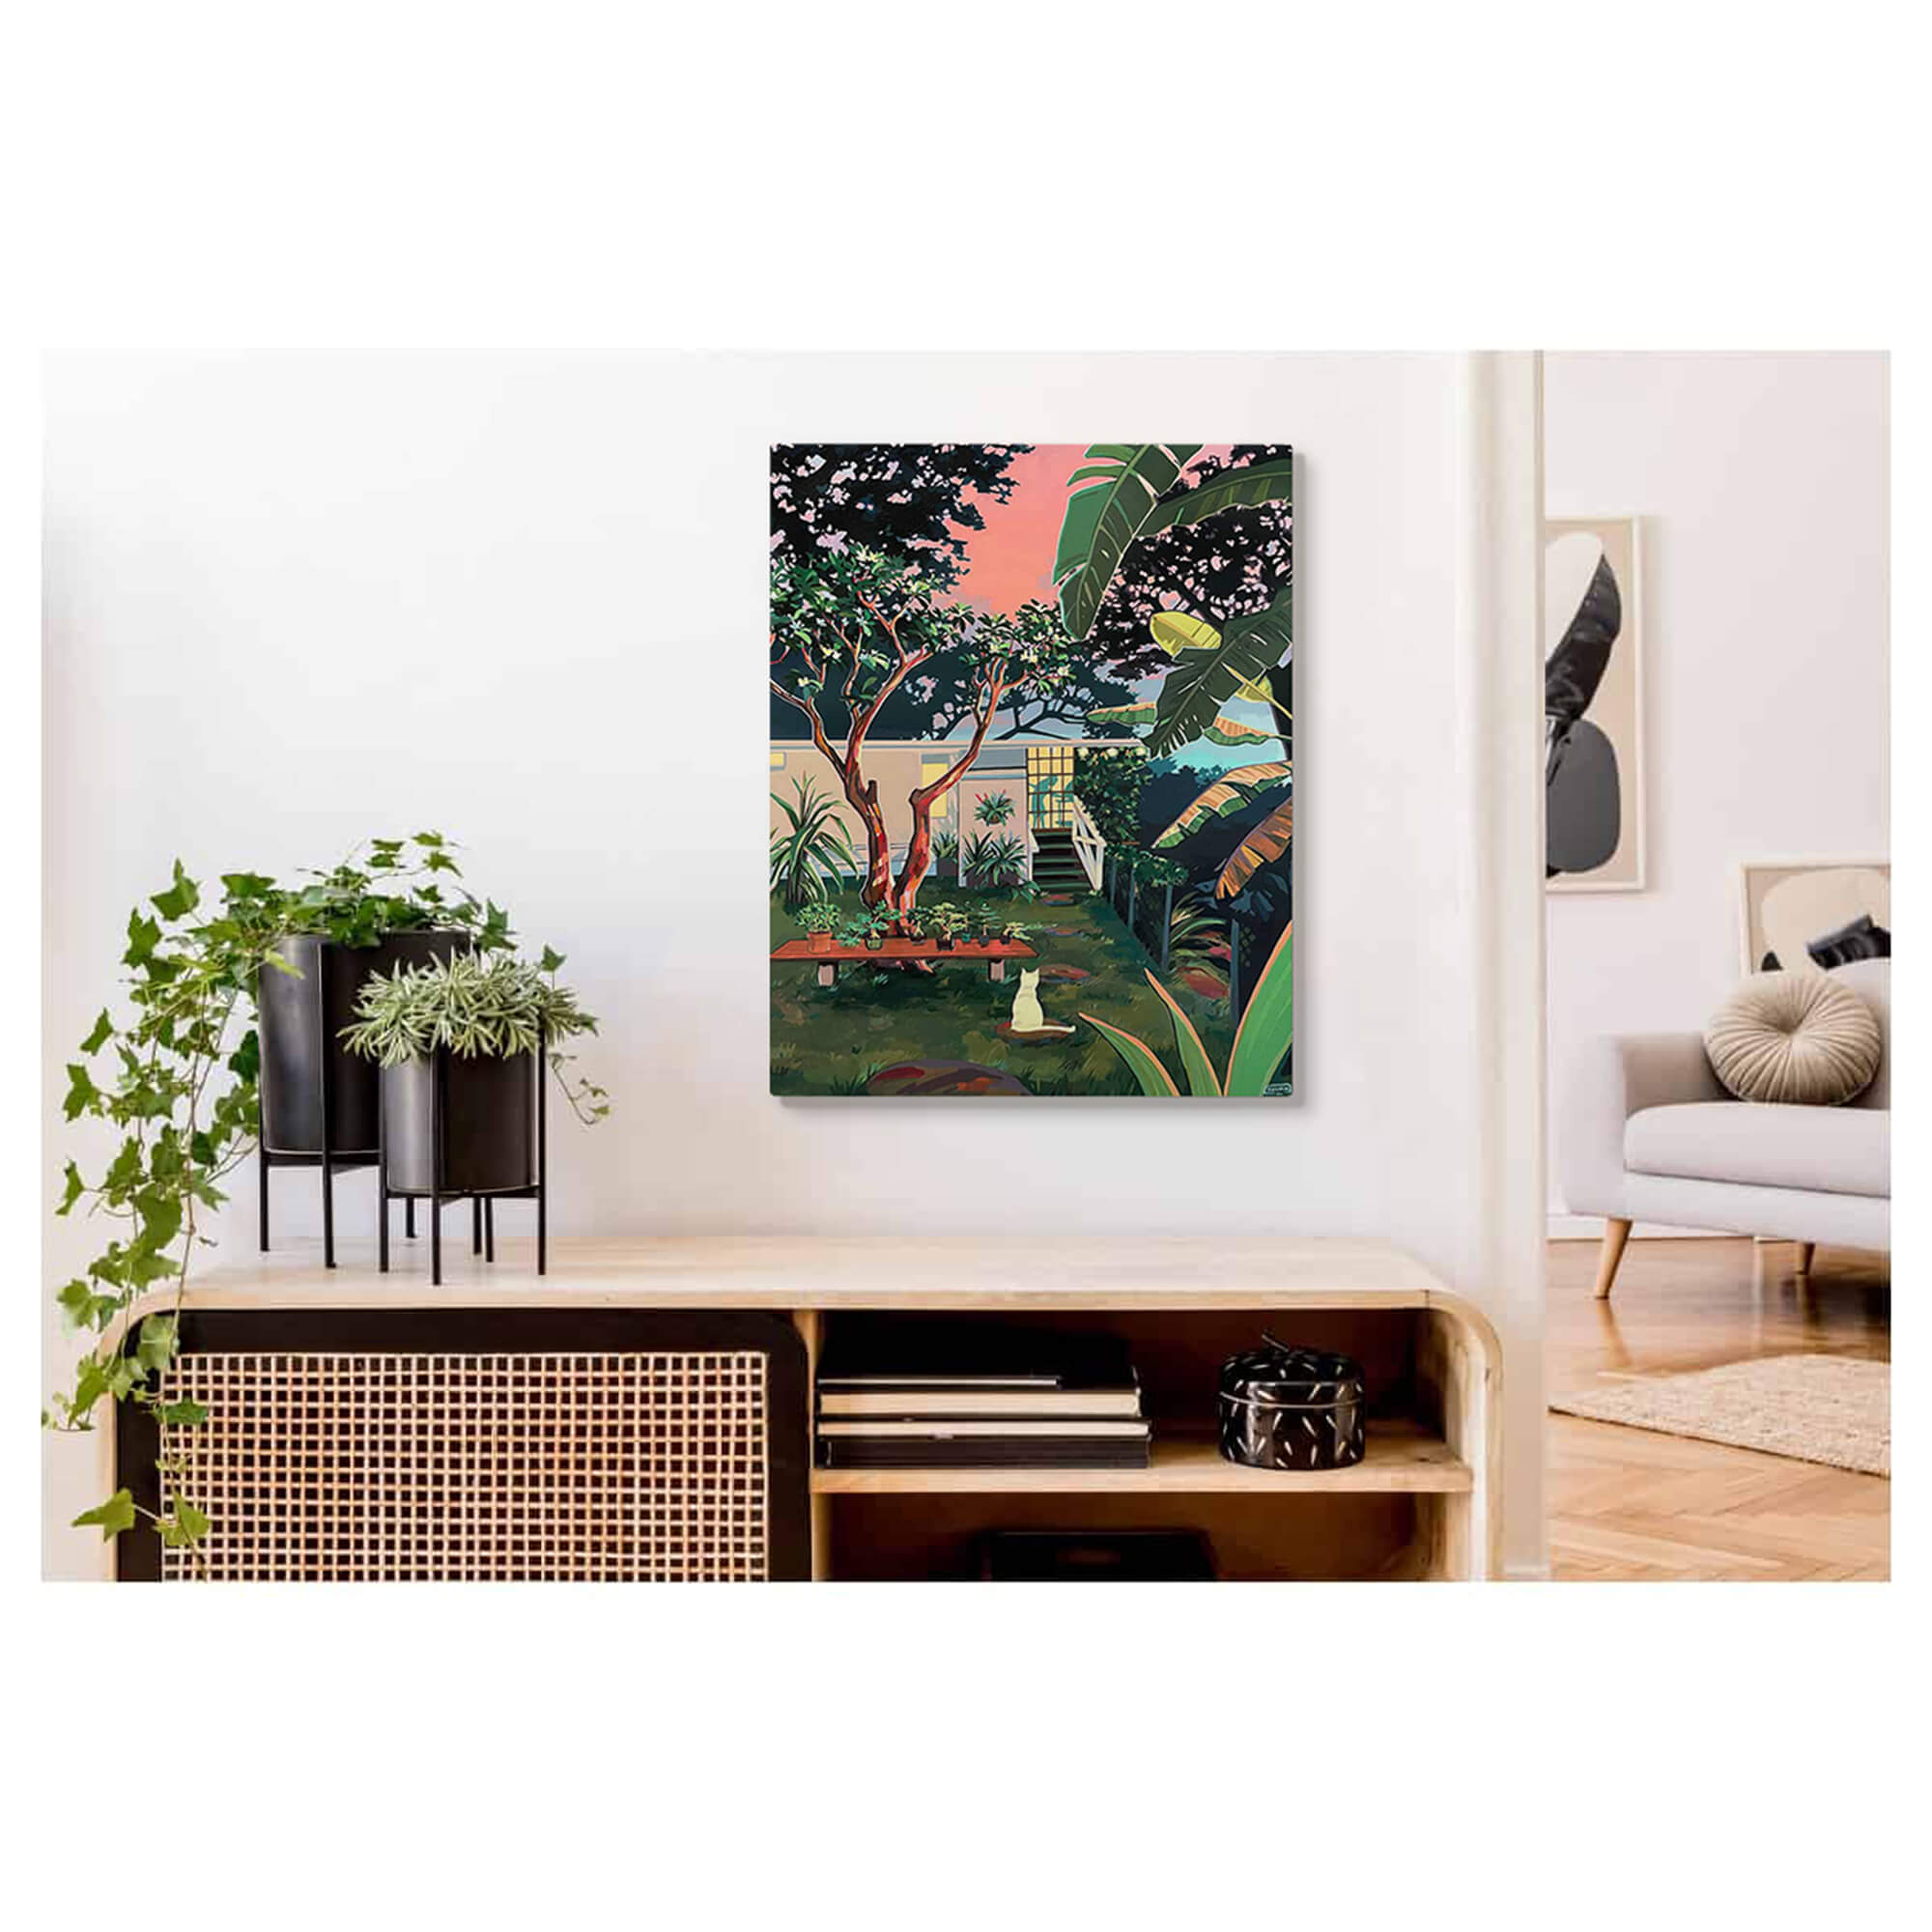 A metal art print of a cat at a Japanese-style backyard with tropical plants by Hawaii artist Christie Shinn